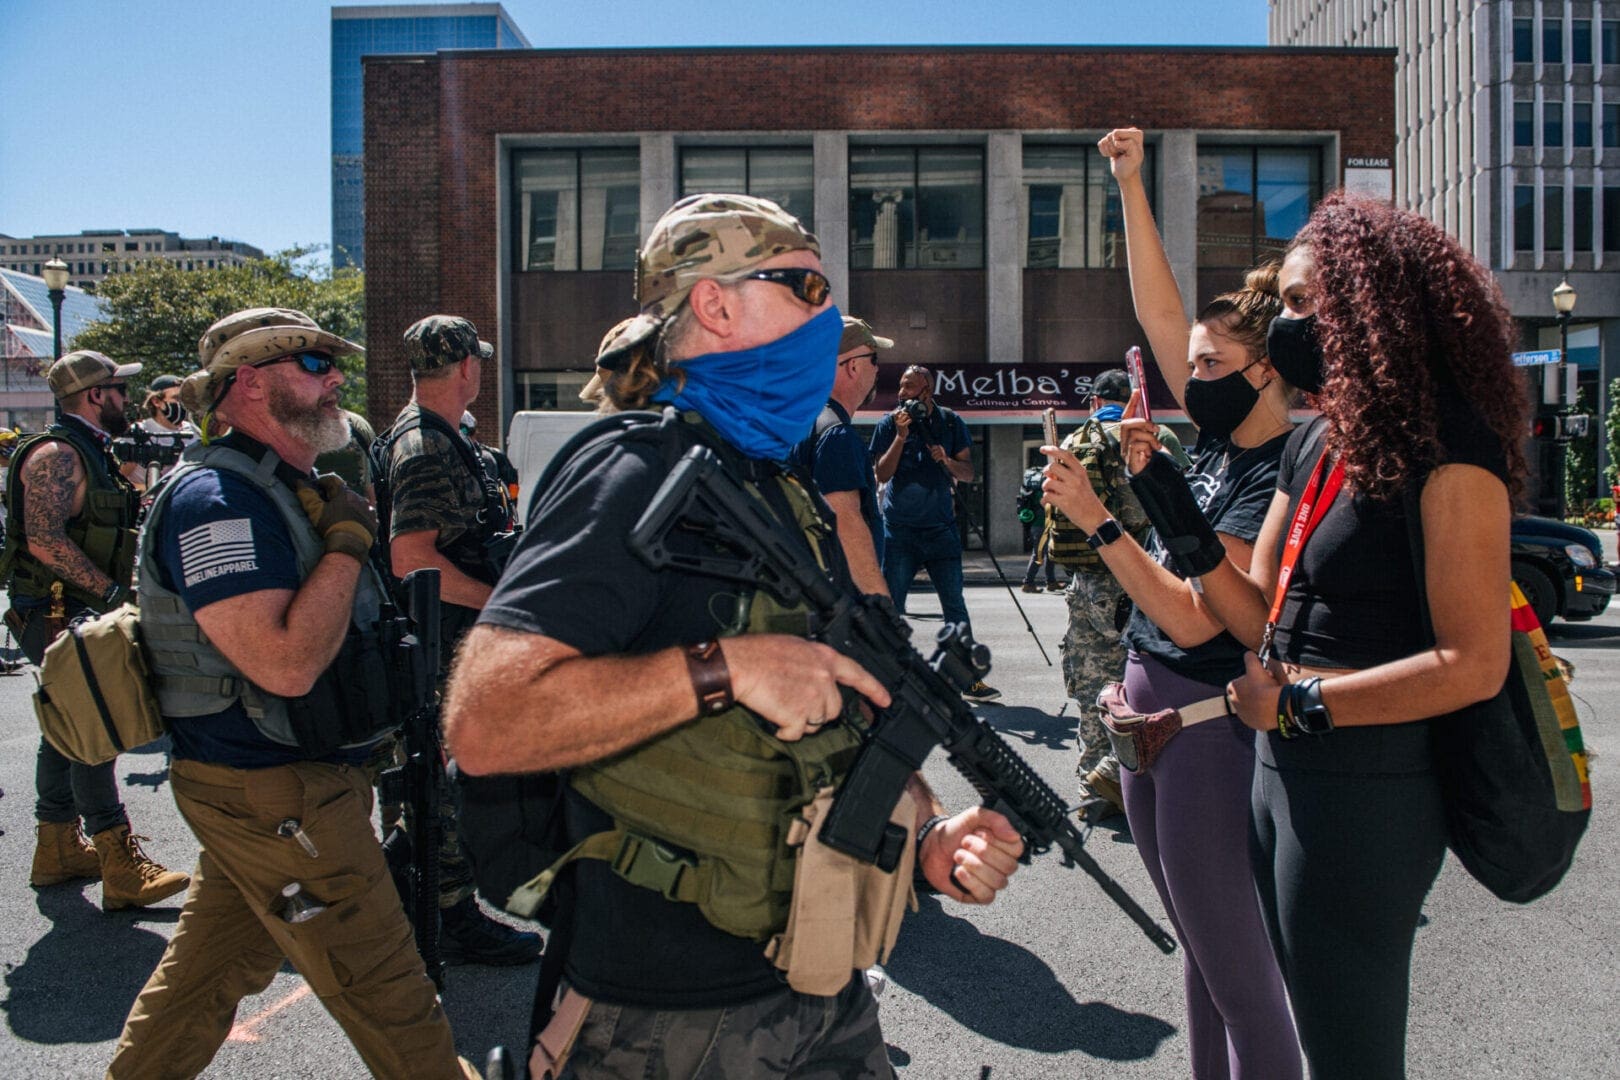 Women stand in the street unarmed as right-wing protesters stand across them, armed